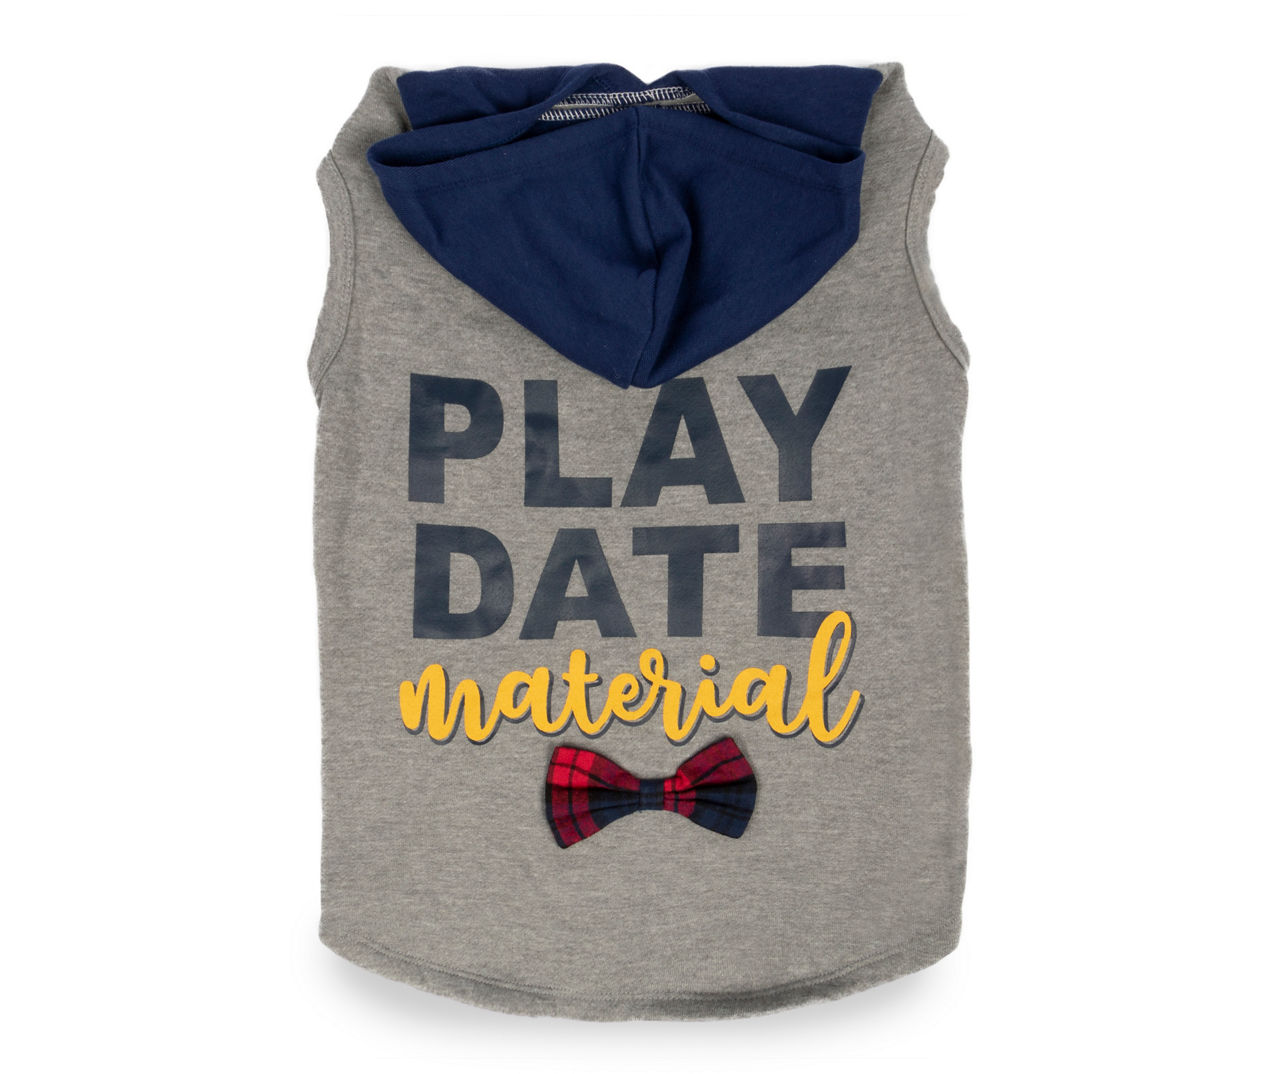 "Play Date Material" Pet Small Gray & Blue Hoodie With Plaid Bowtie